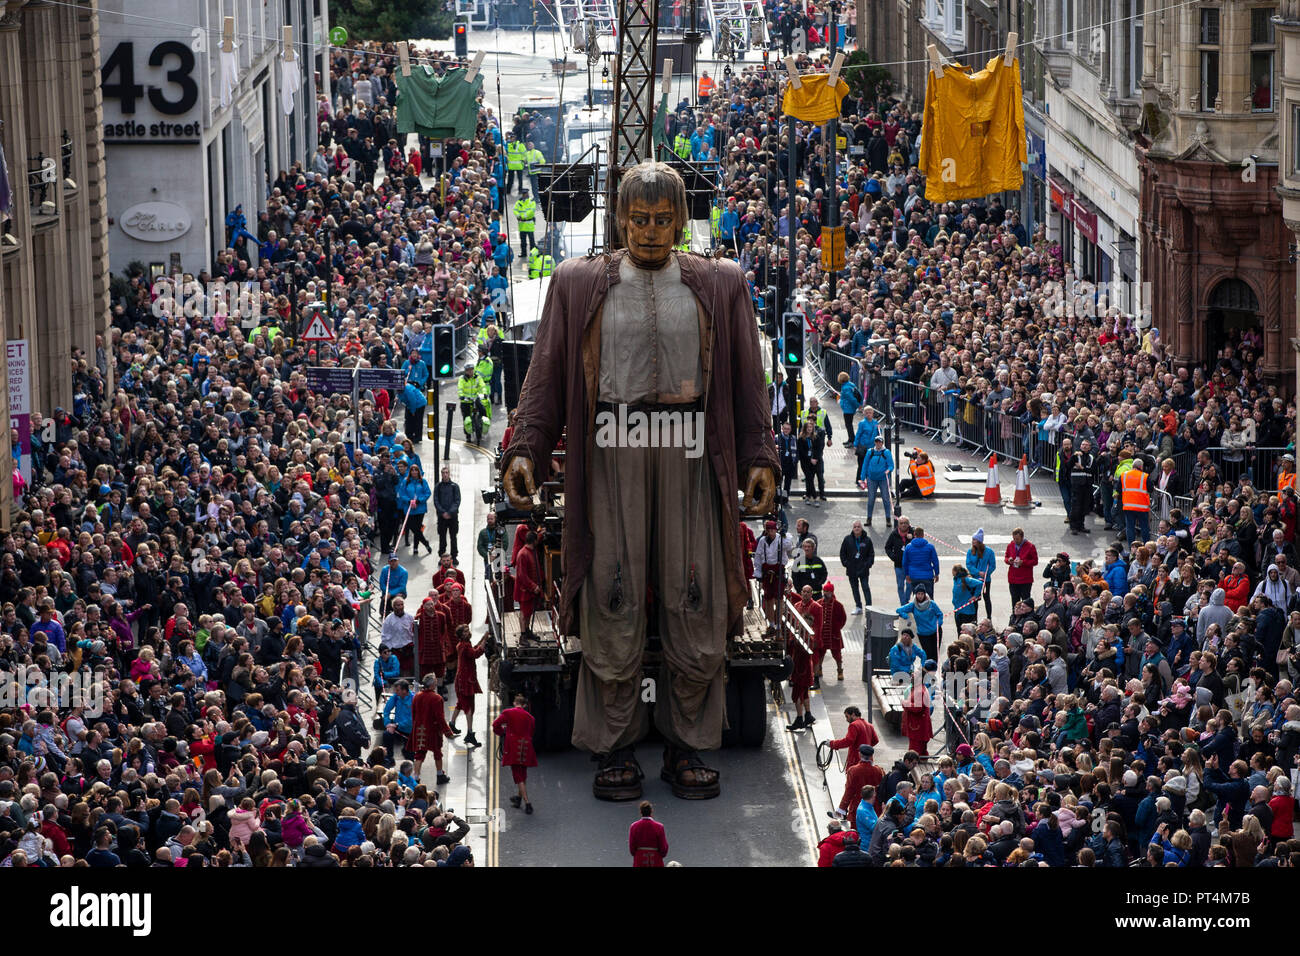 The Royal De Luxe theatre company's 'Giants' street puppet, The Giant Man, during a street theatre performance in Liverpool. Stock Photo